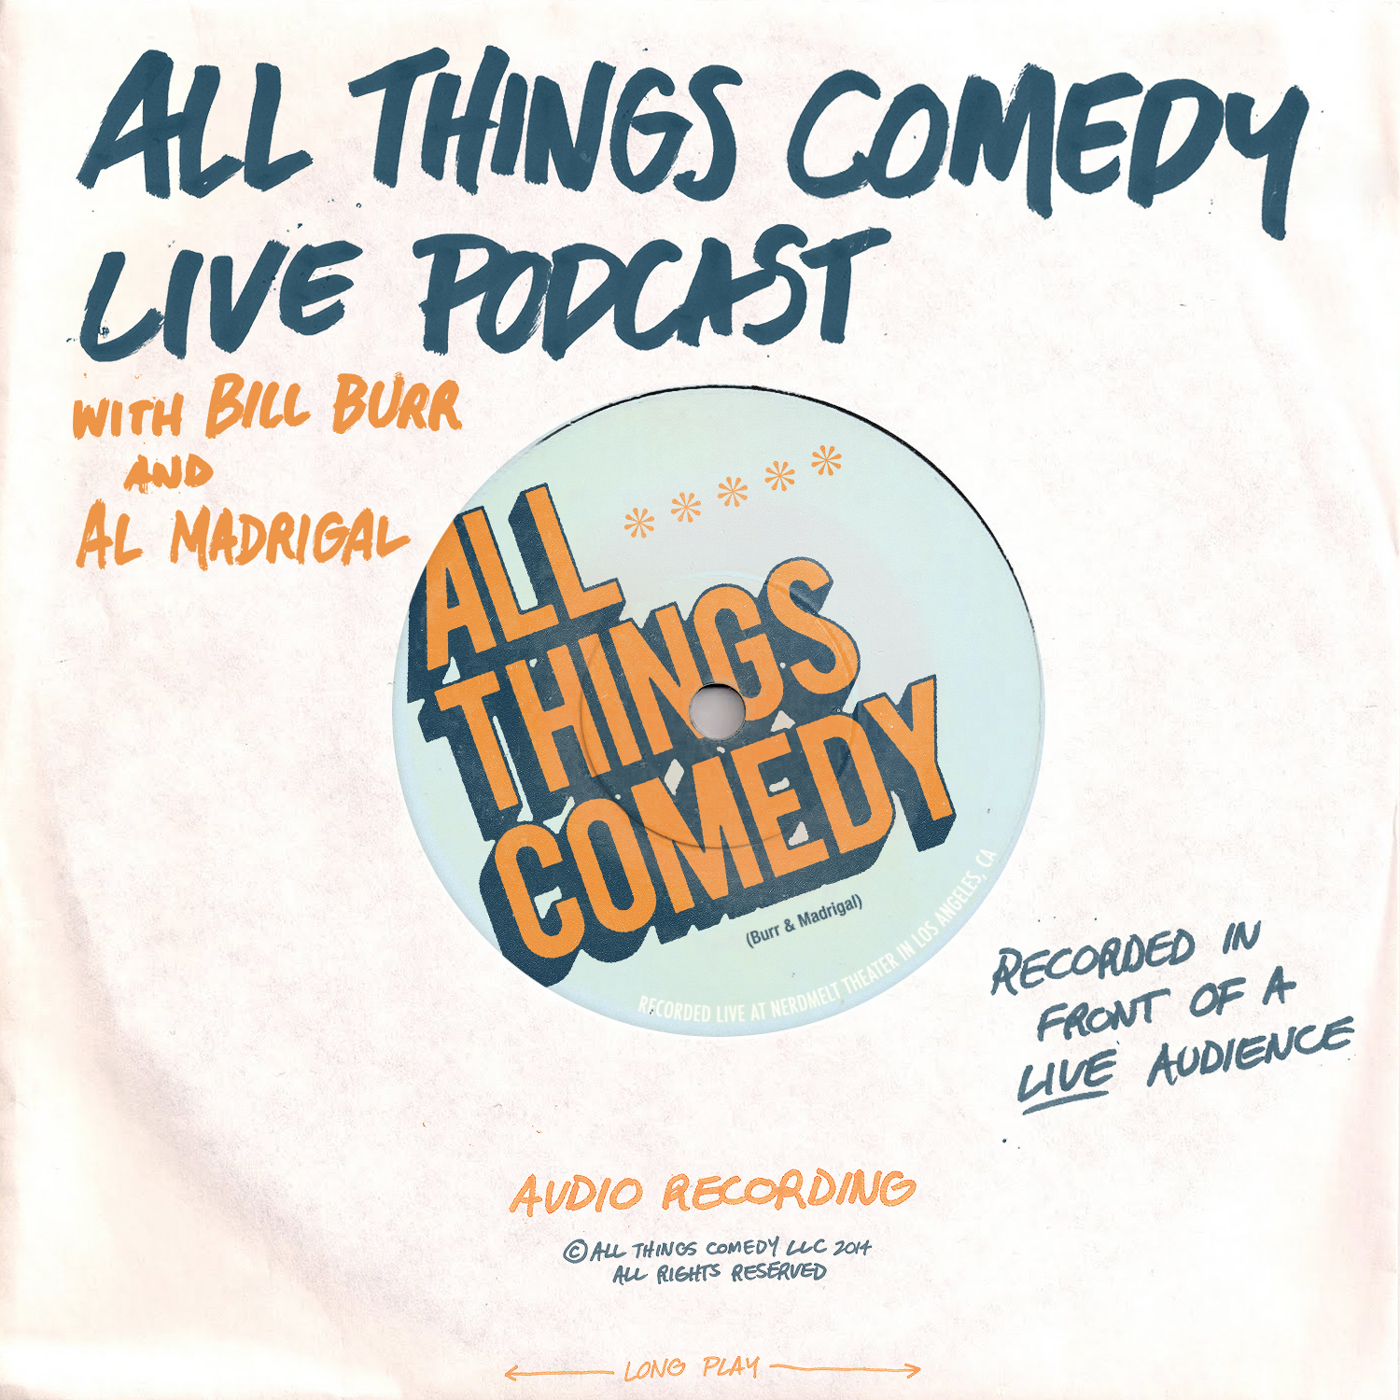 All Things Comedy Live